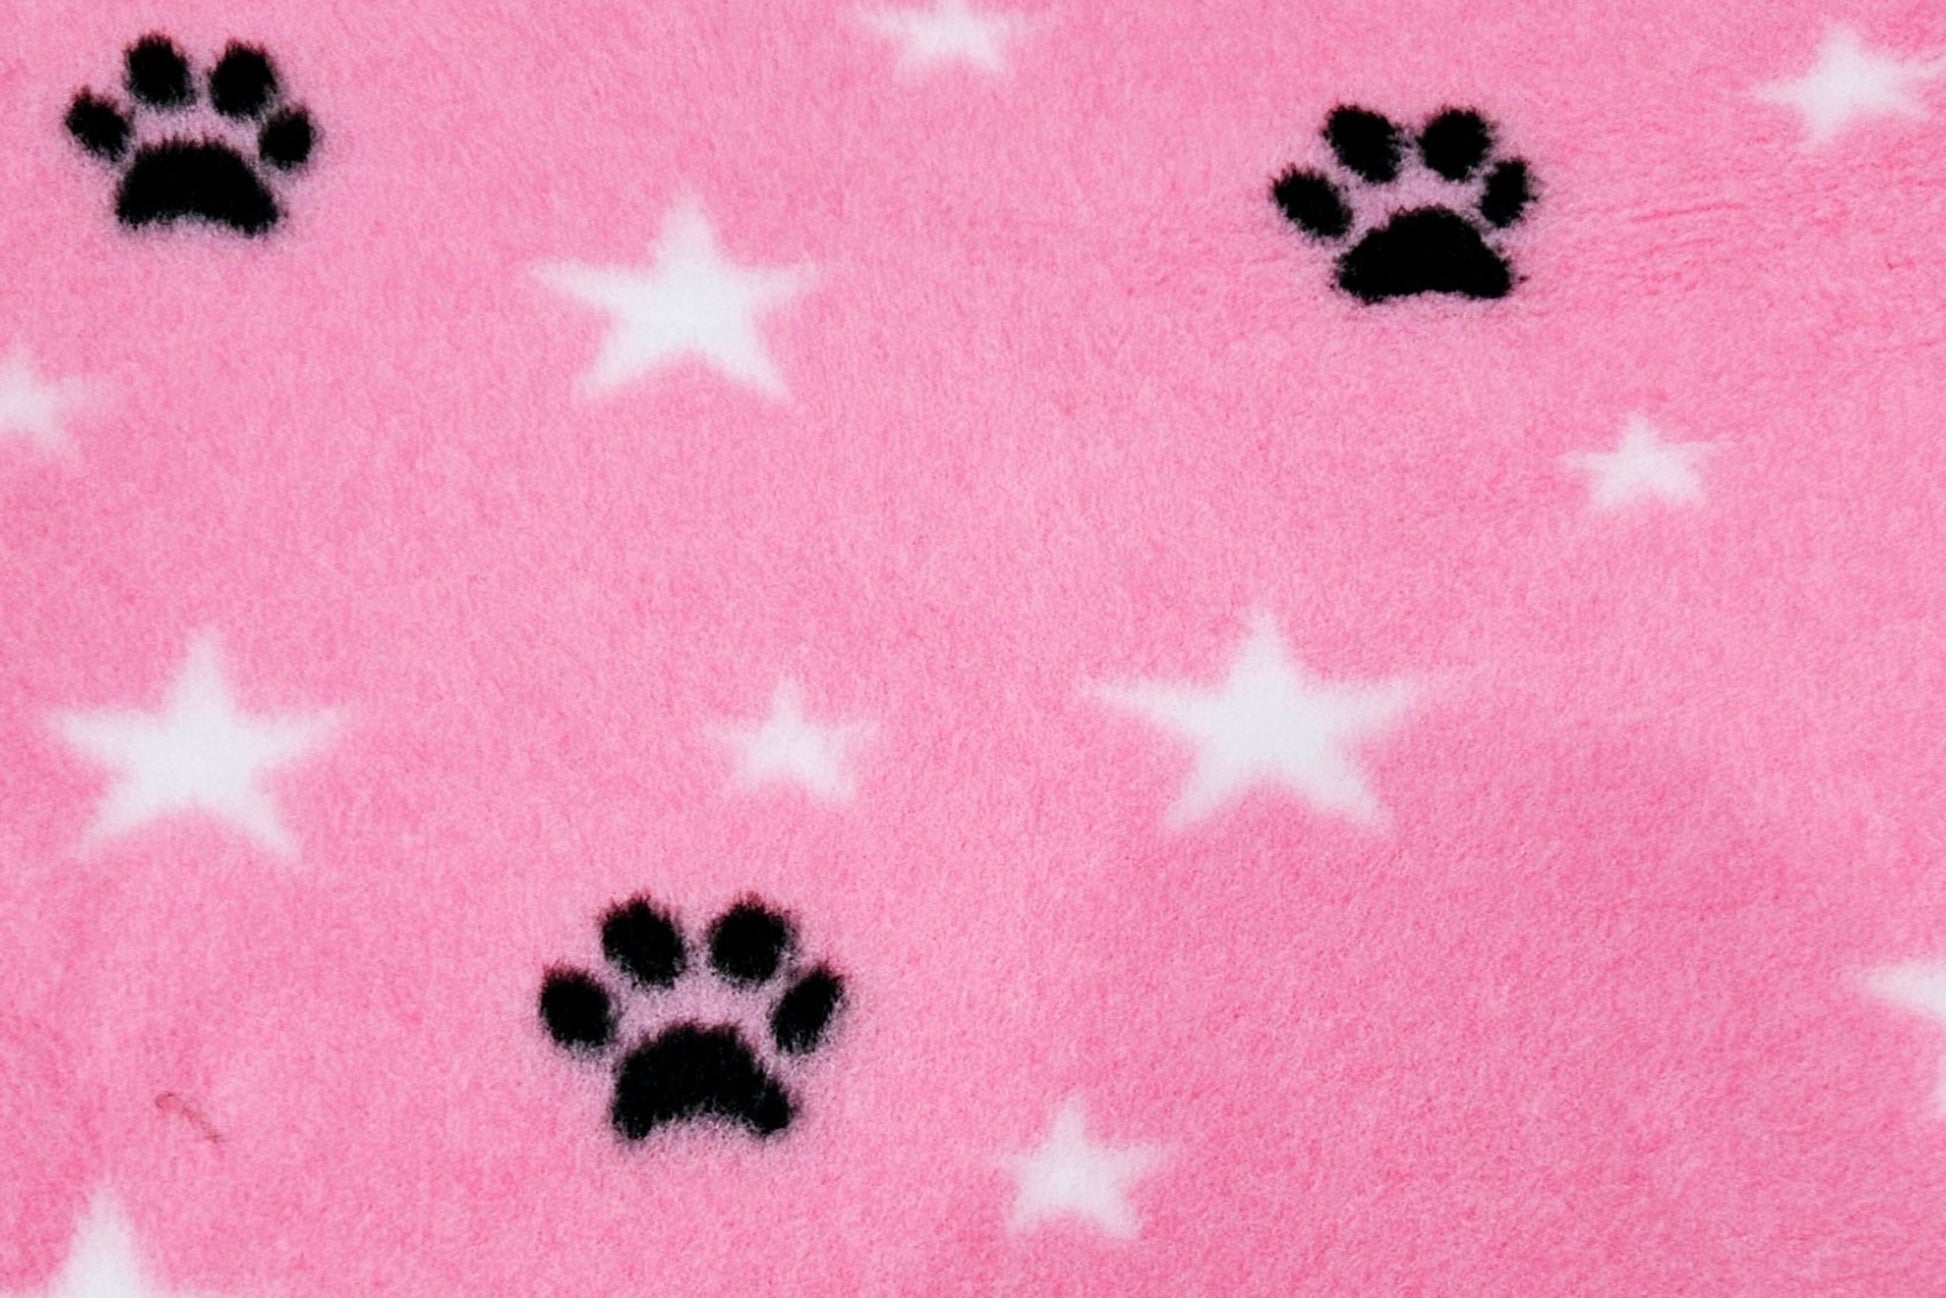 Vet Bed - Rubber Backed - Pink with White Stars and Black Paws